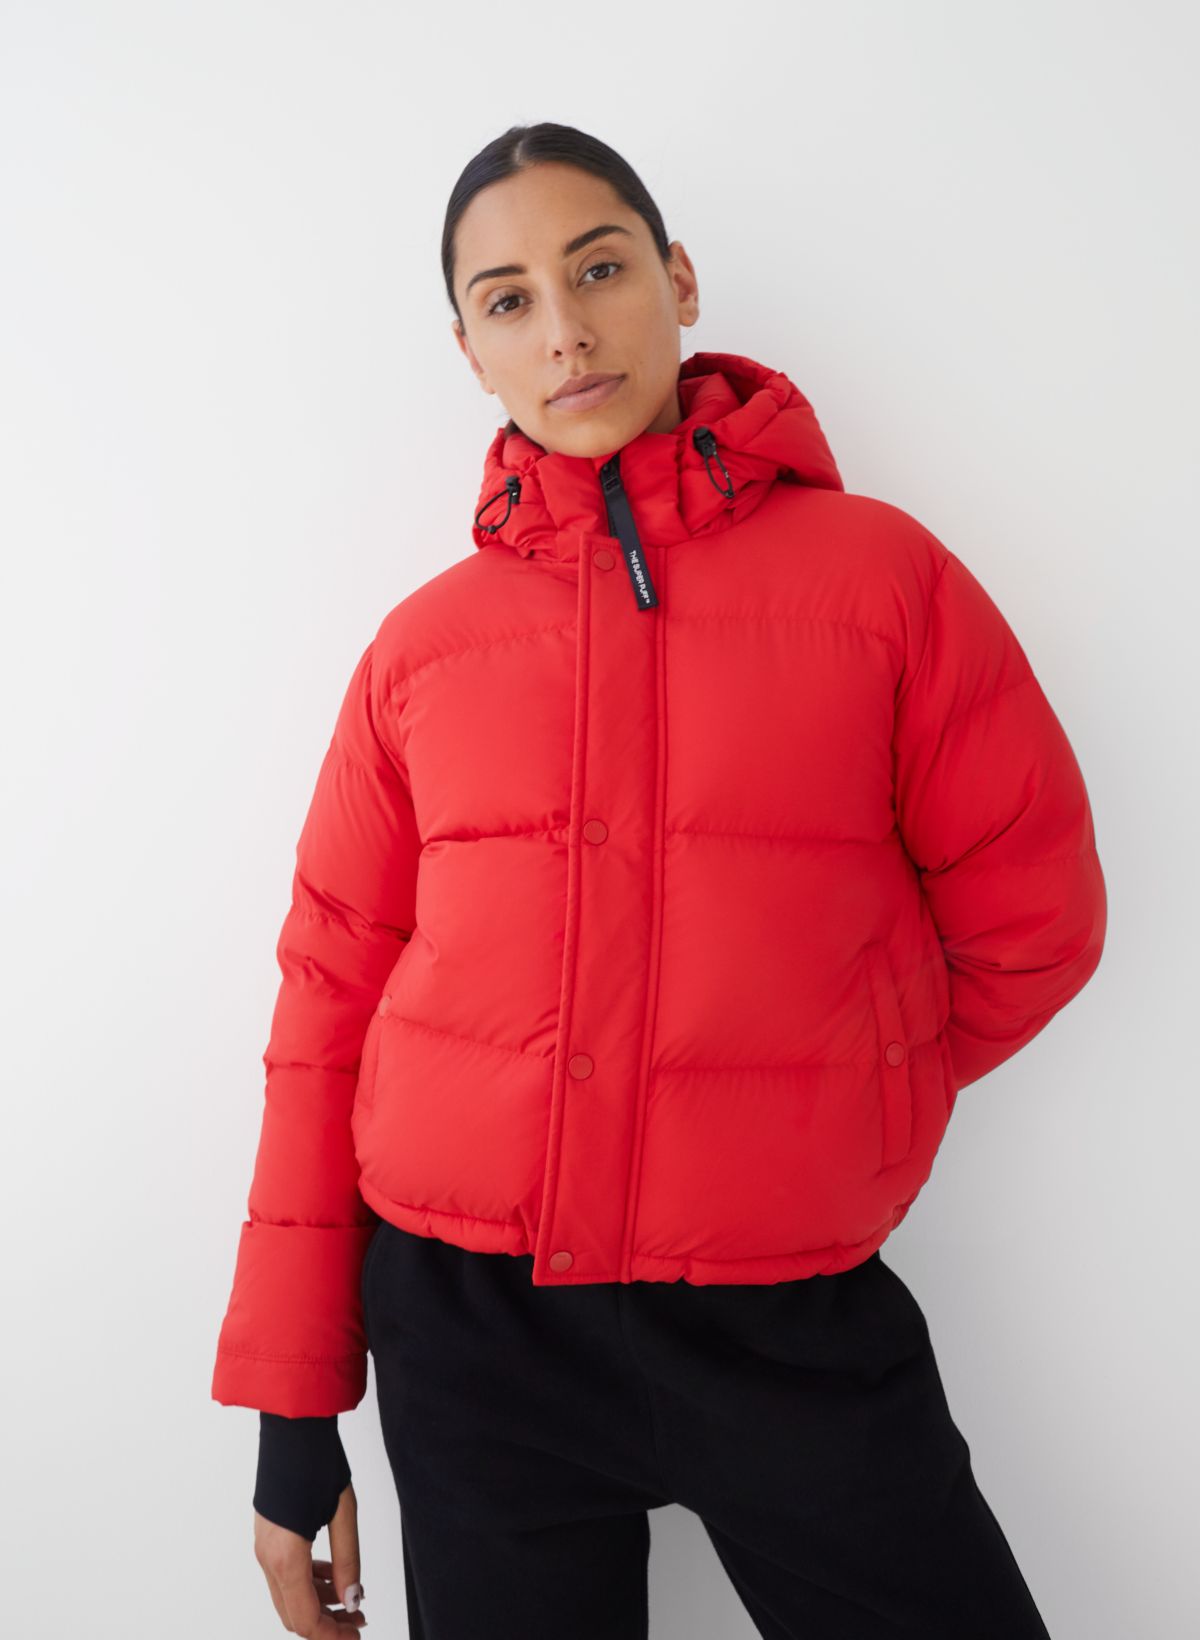 Glossy Red Parachute Cropped Puffer Jacket